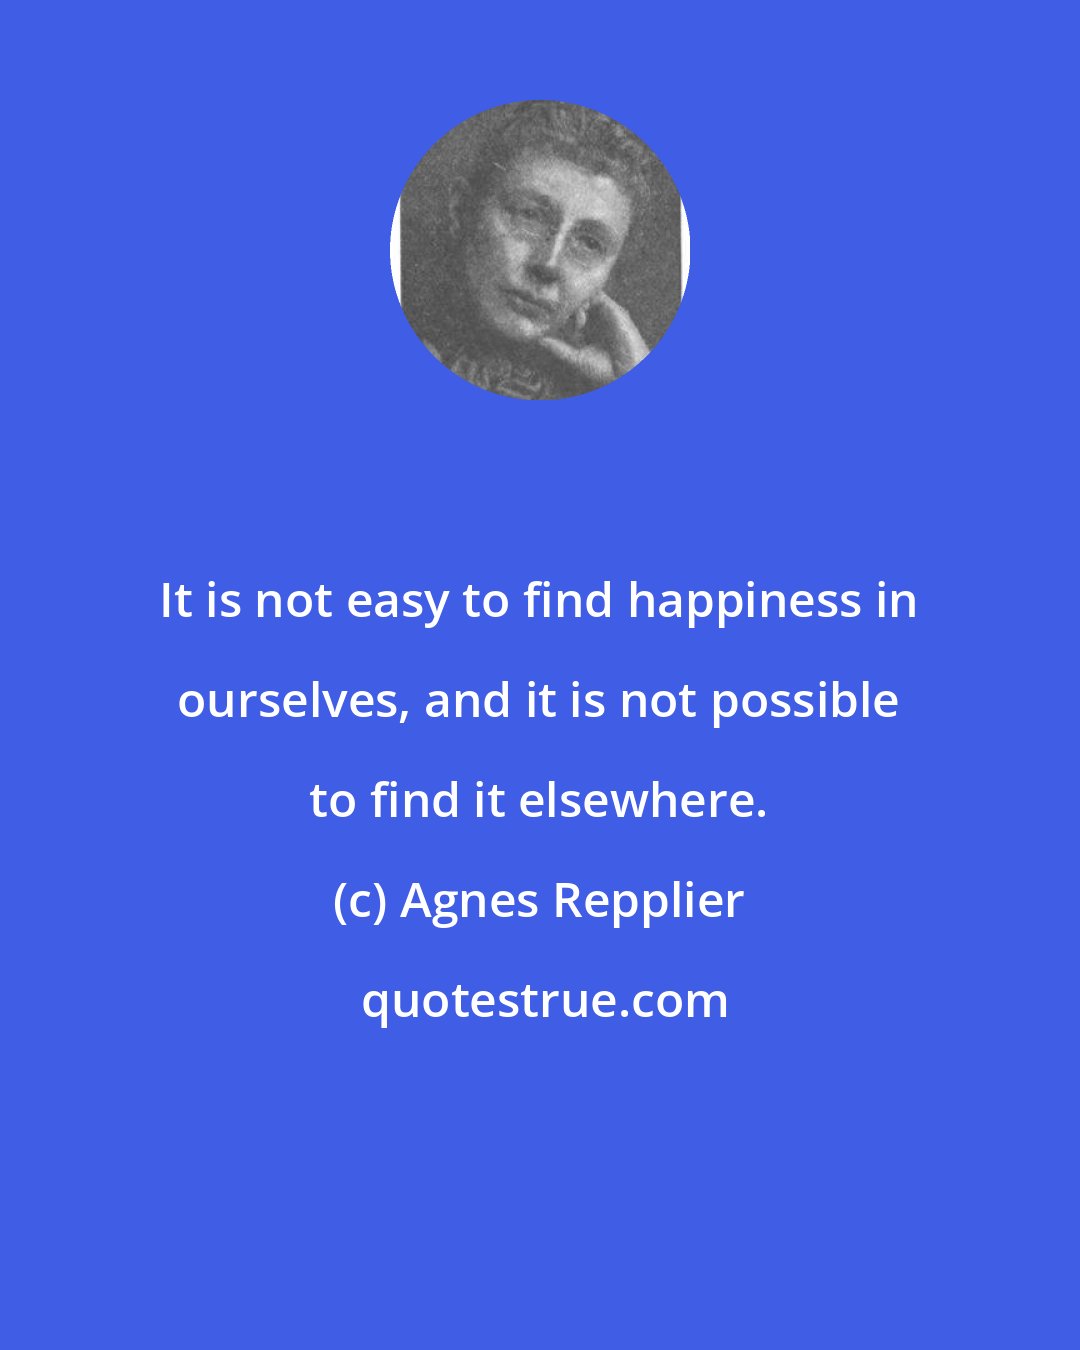 Agnes Repplier: It is not easy to find happiness in ourselves, and it is not possible to find it elsewhere.